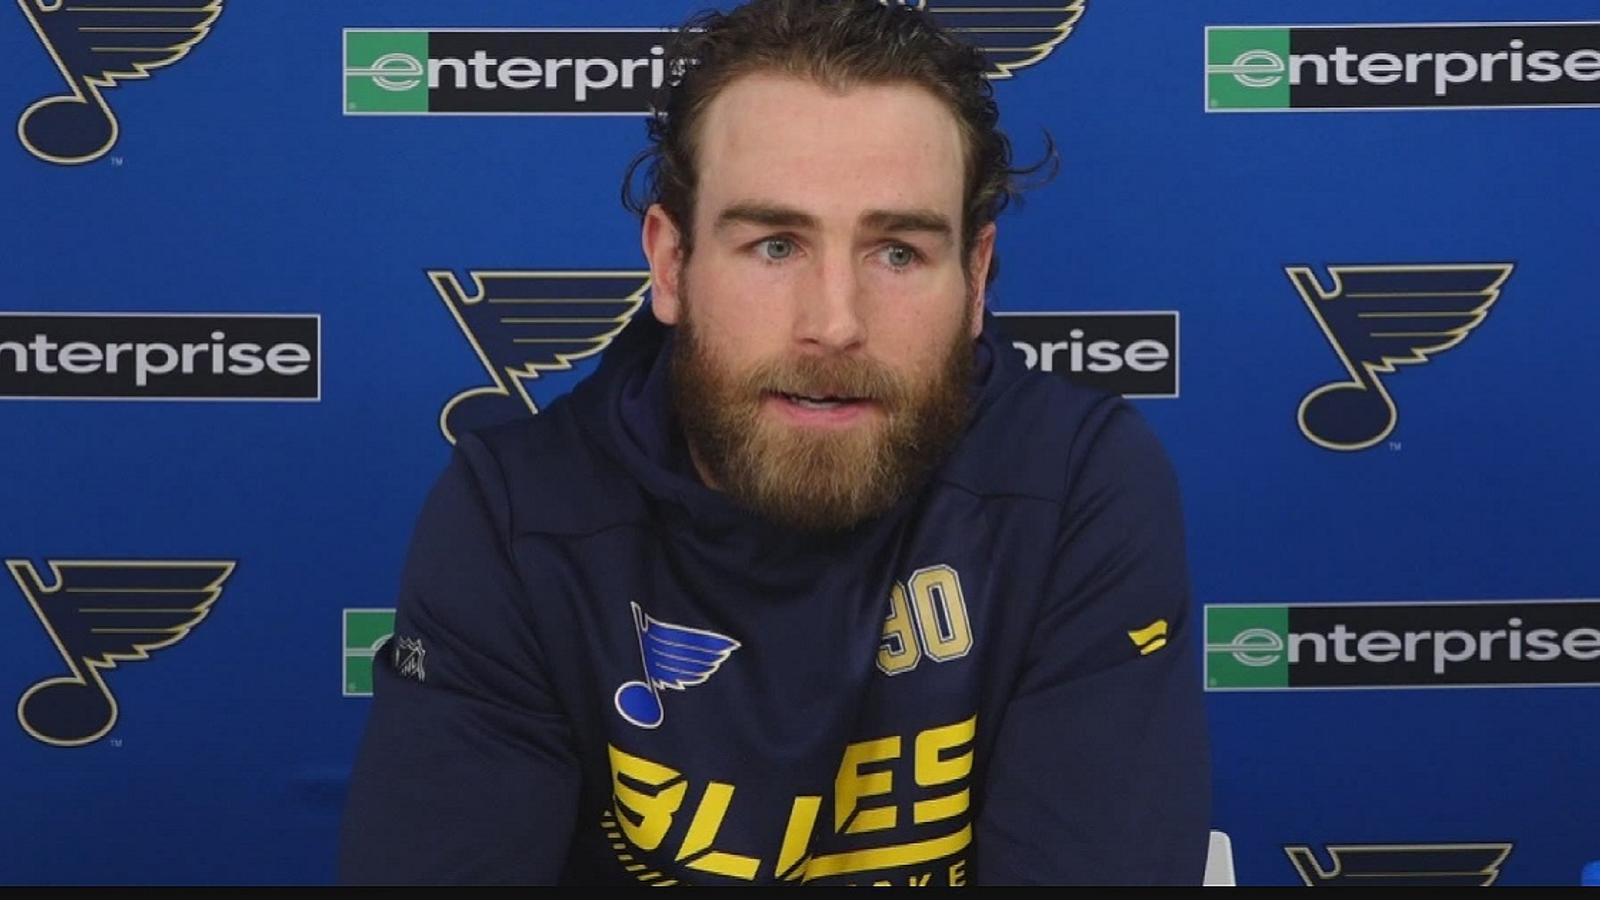 Blues captain Ryan O'Reilly issues a playoff guarantee.